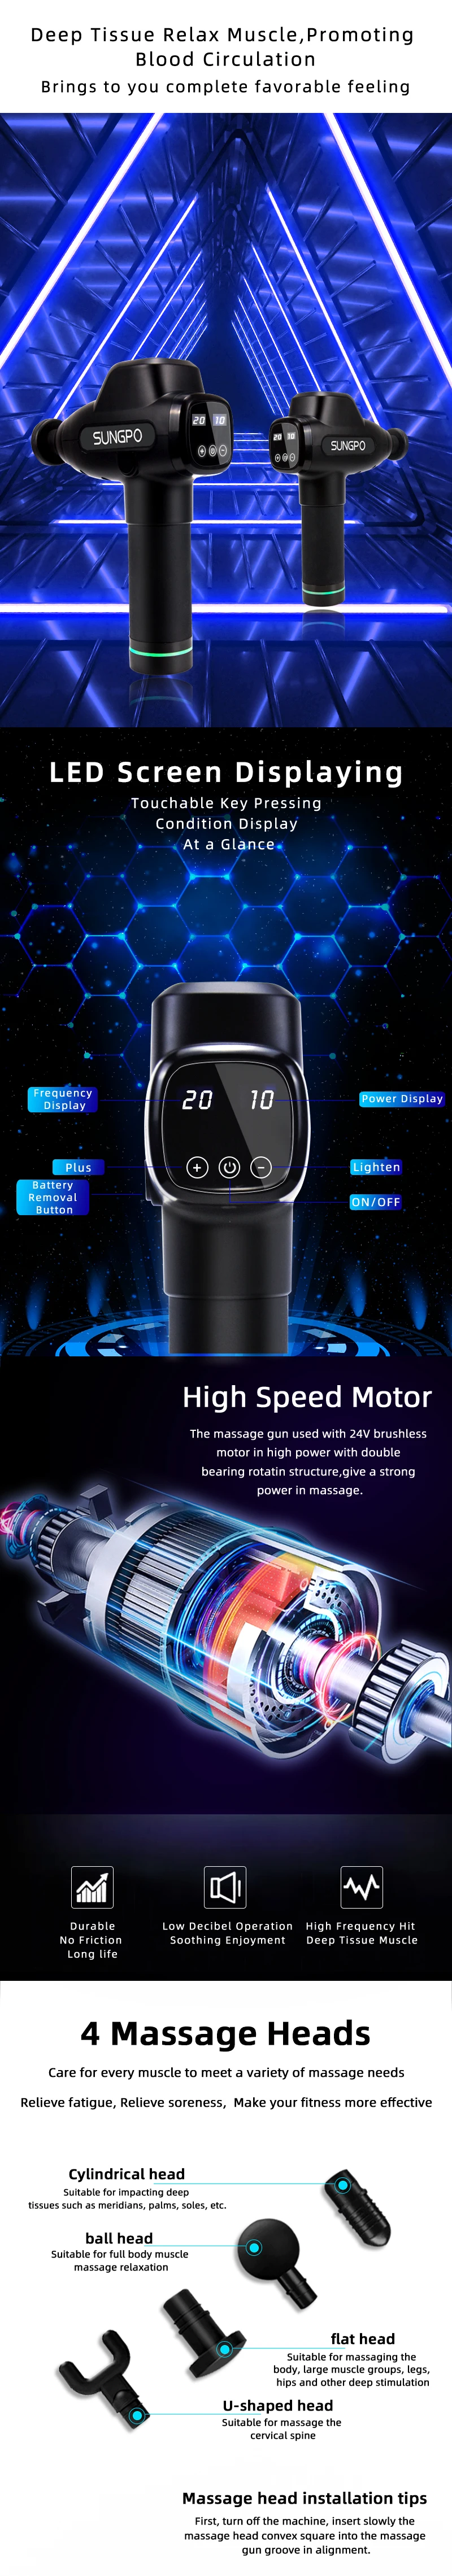 Massage Gun with Wholesale electric impulse  tech multifunctional therapy muscle massage gun tool